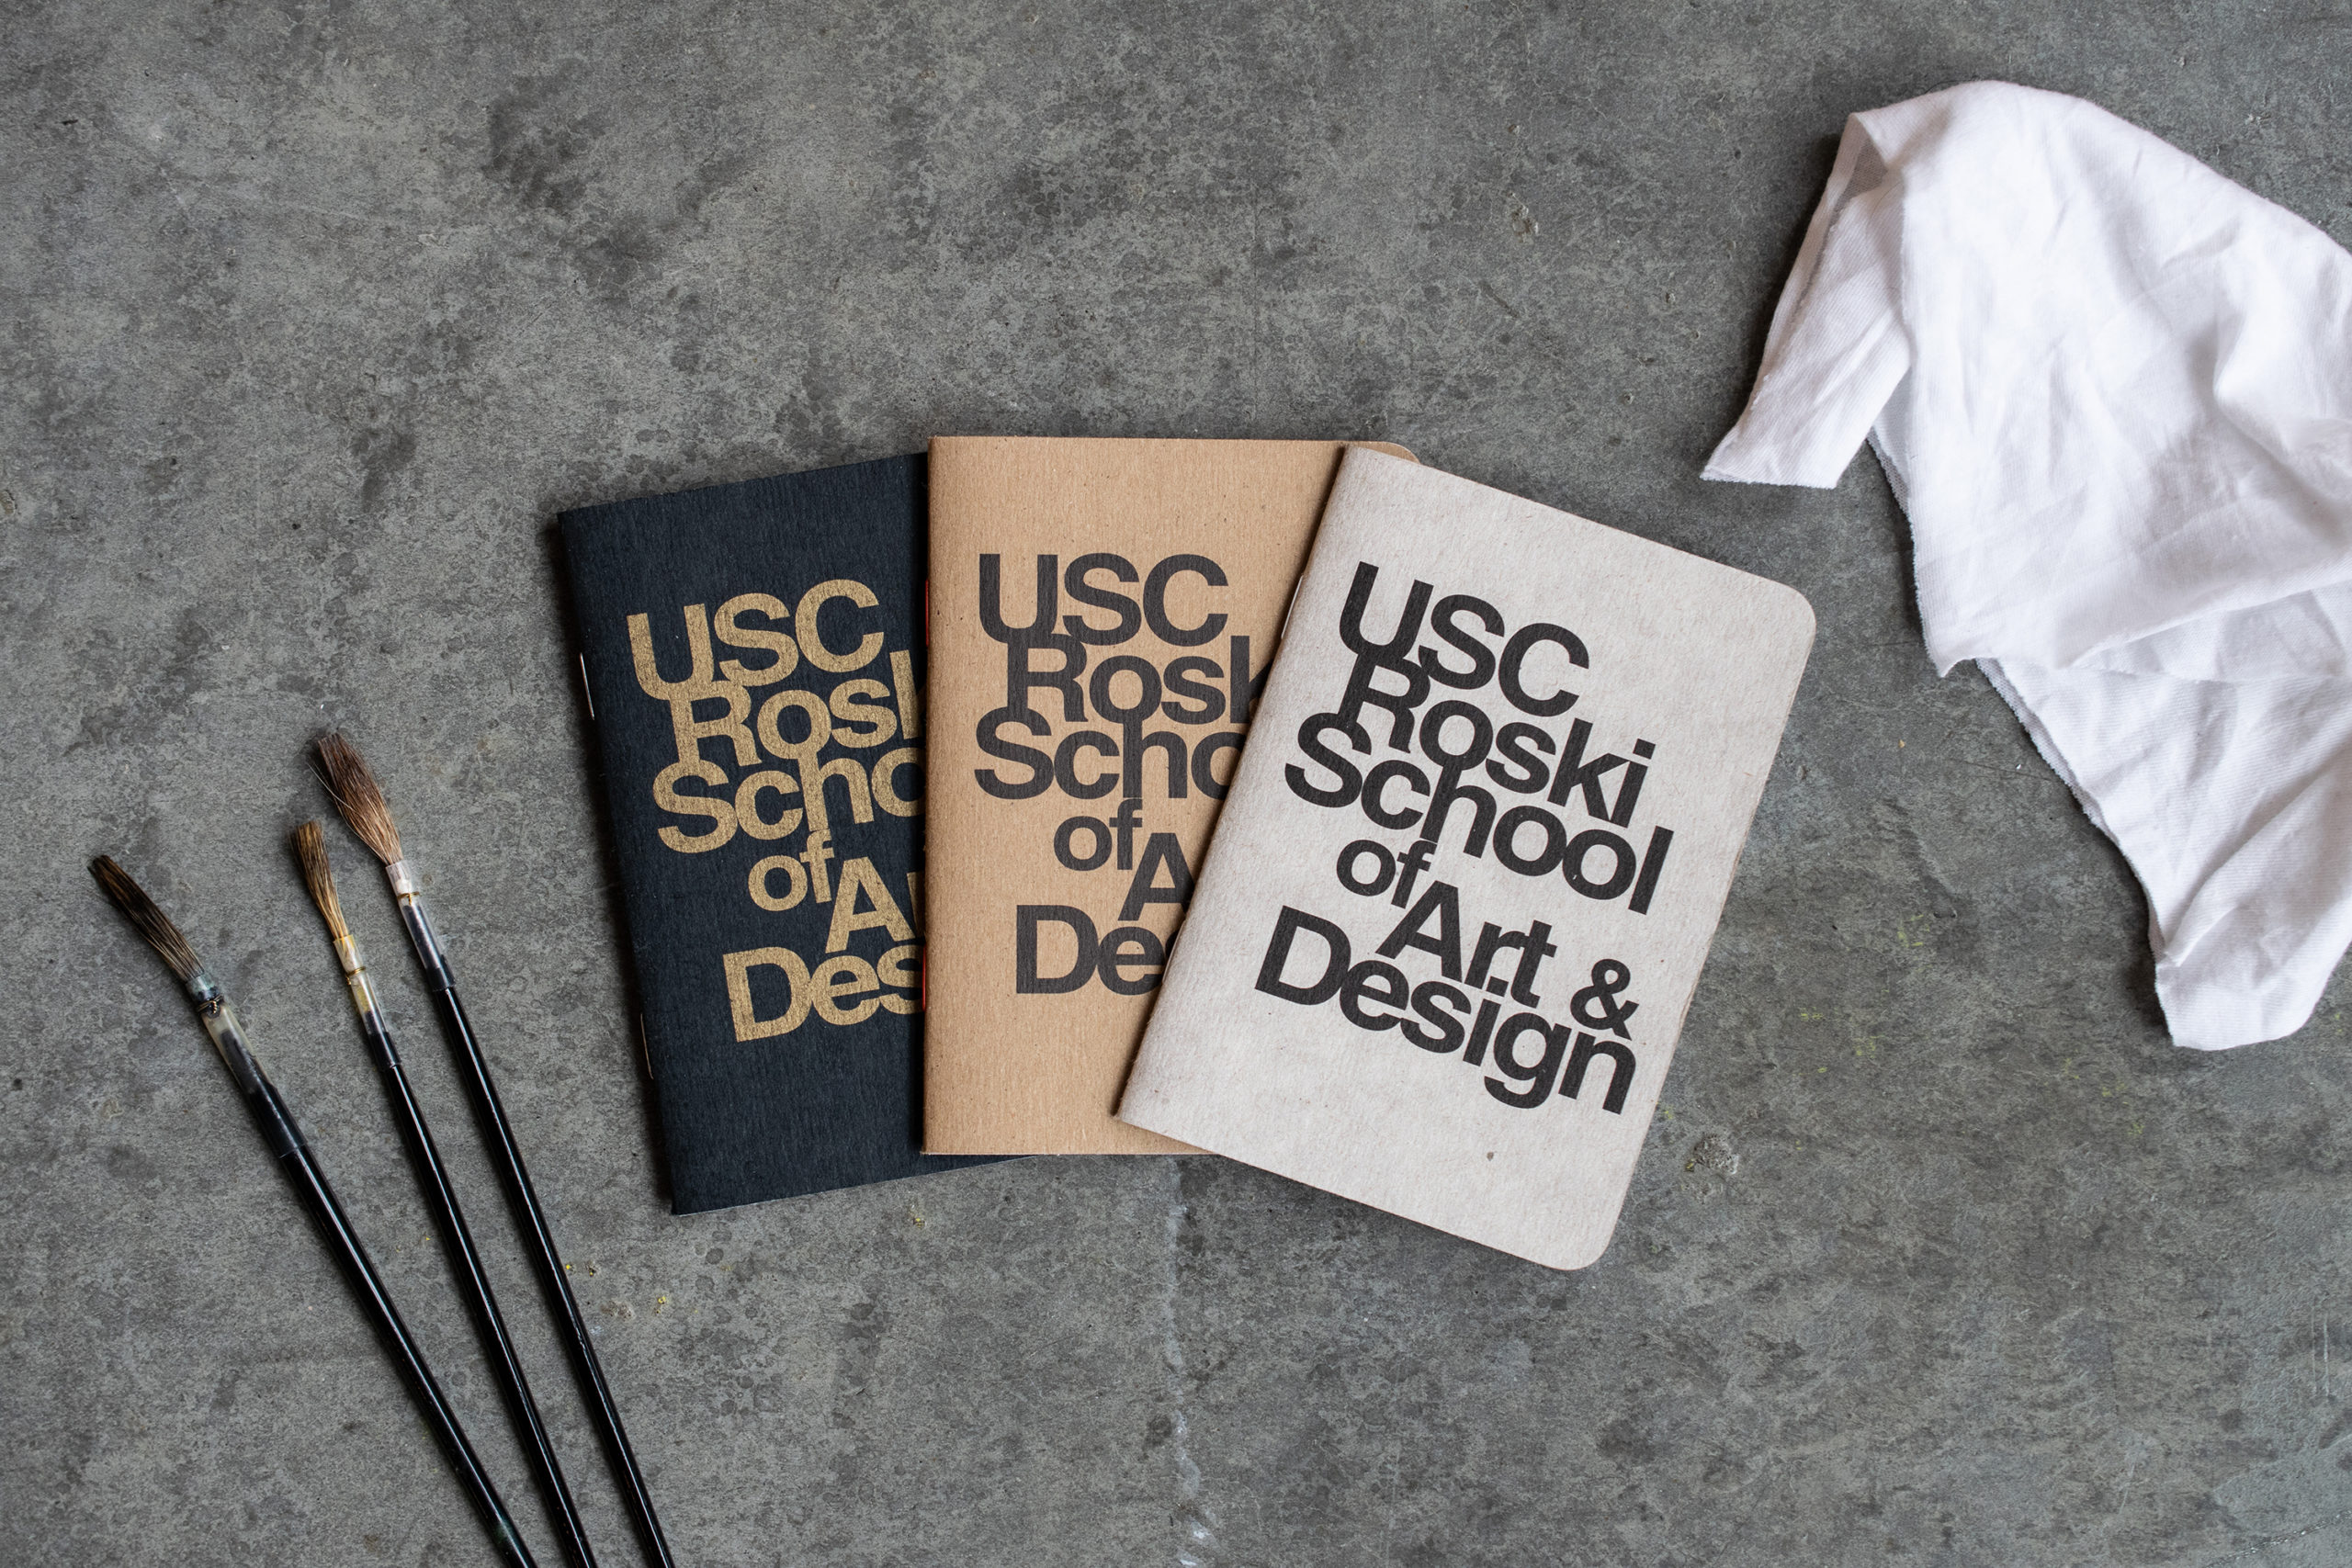 Three books with the logo of USC Roski School of Art and Design printed on their cover.